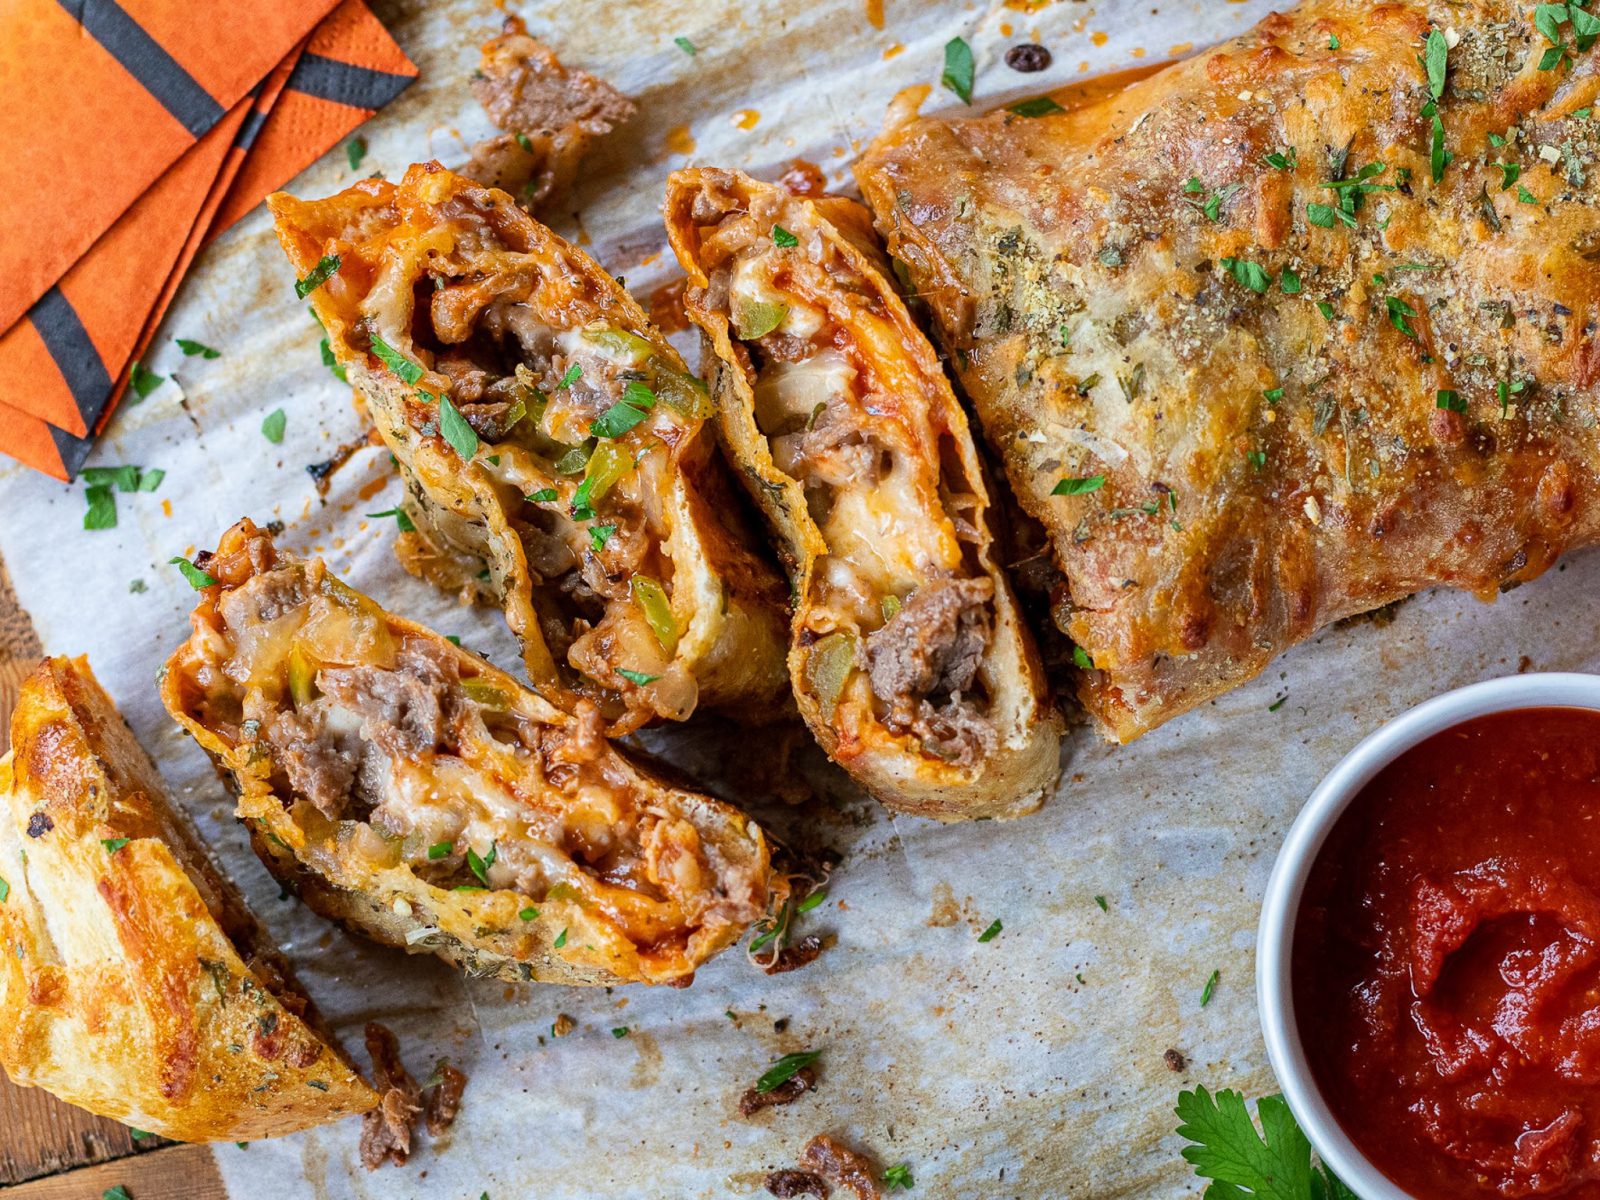 Pepper Steak Stromboli Is The Perfect March Madness Snack Made With Gary’s QuickSteak